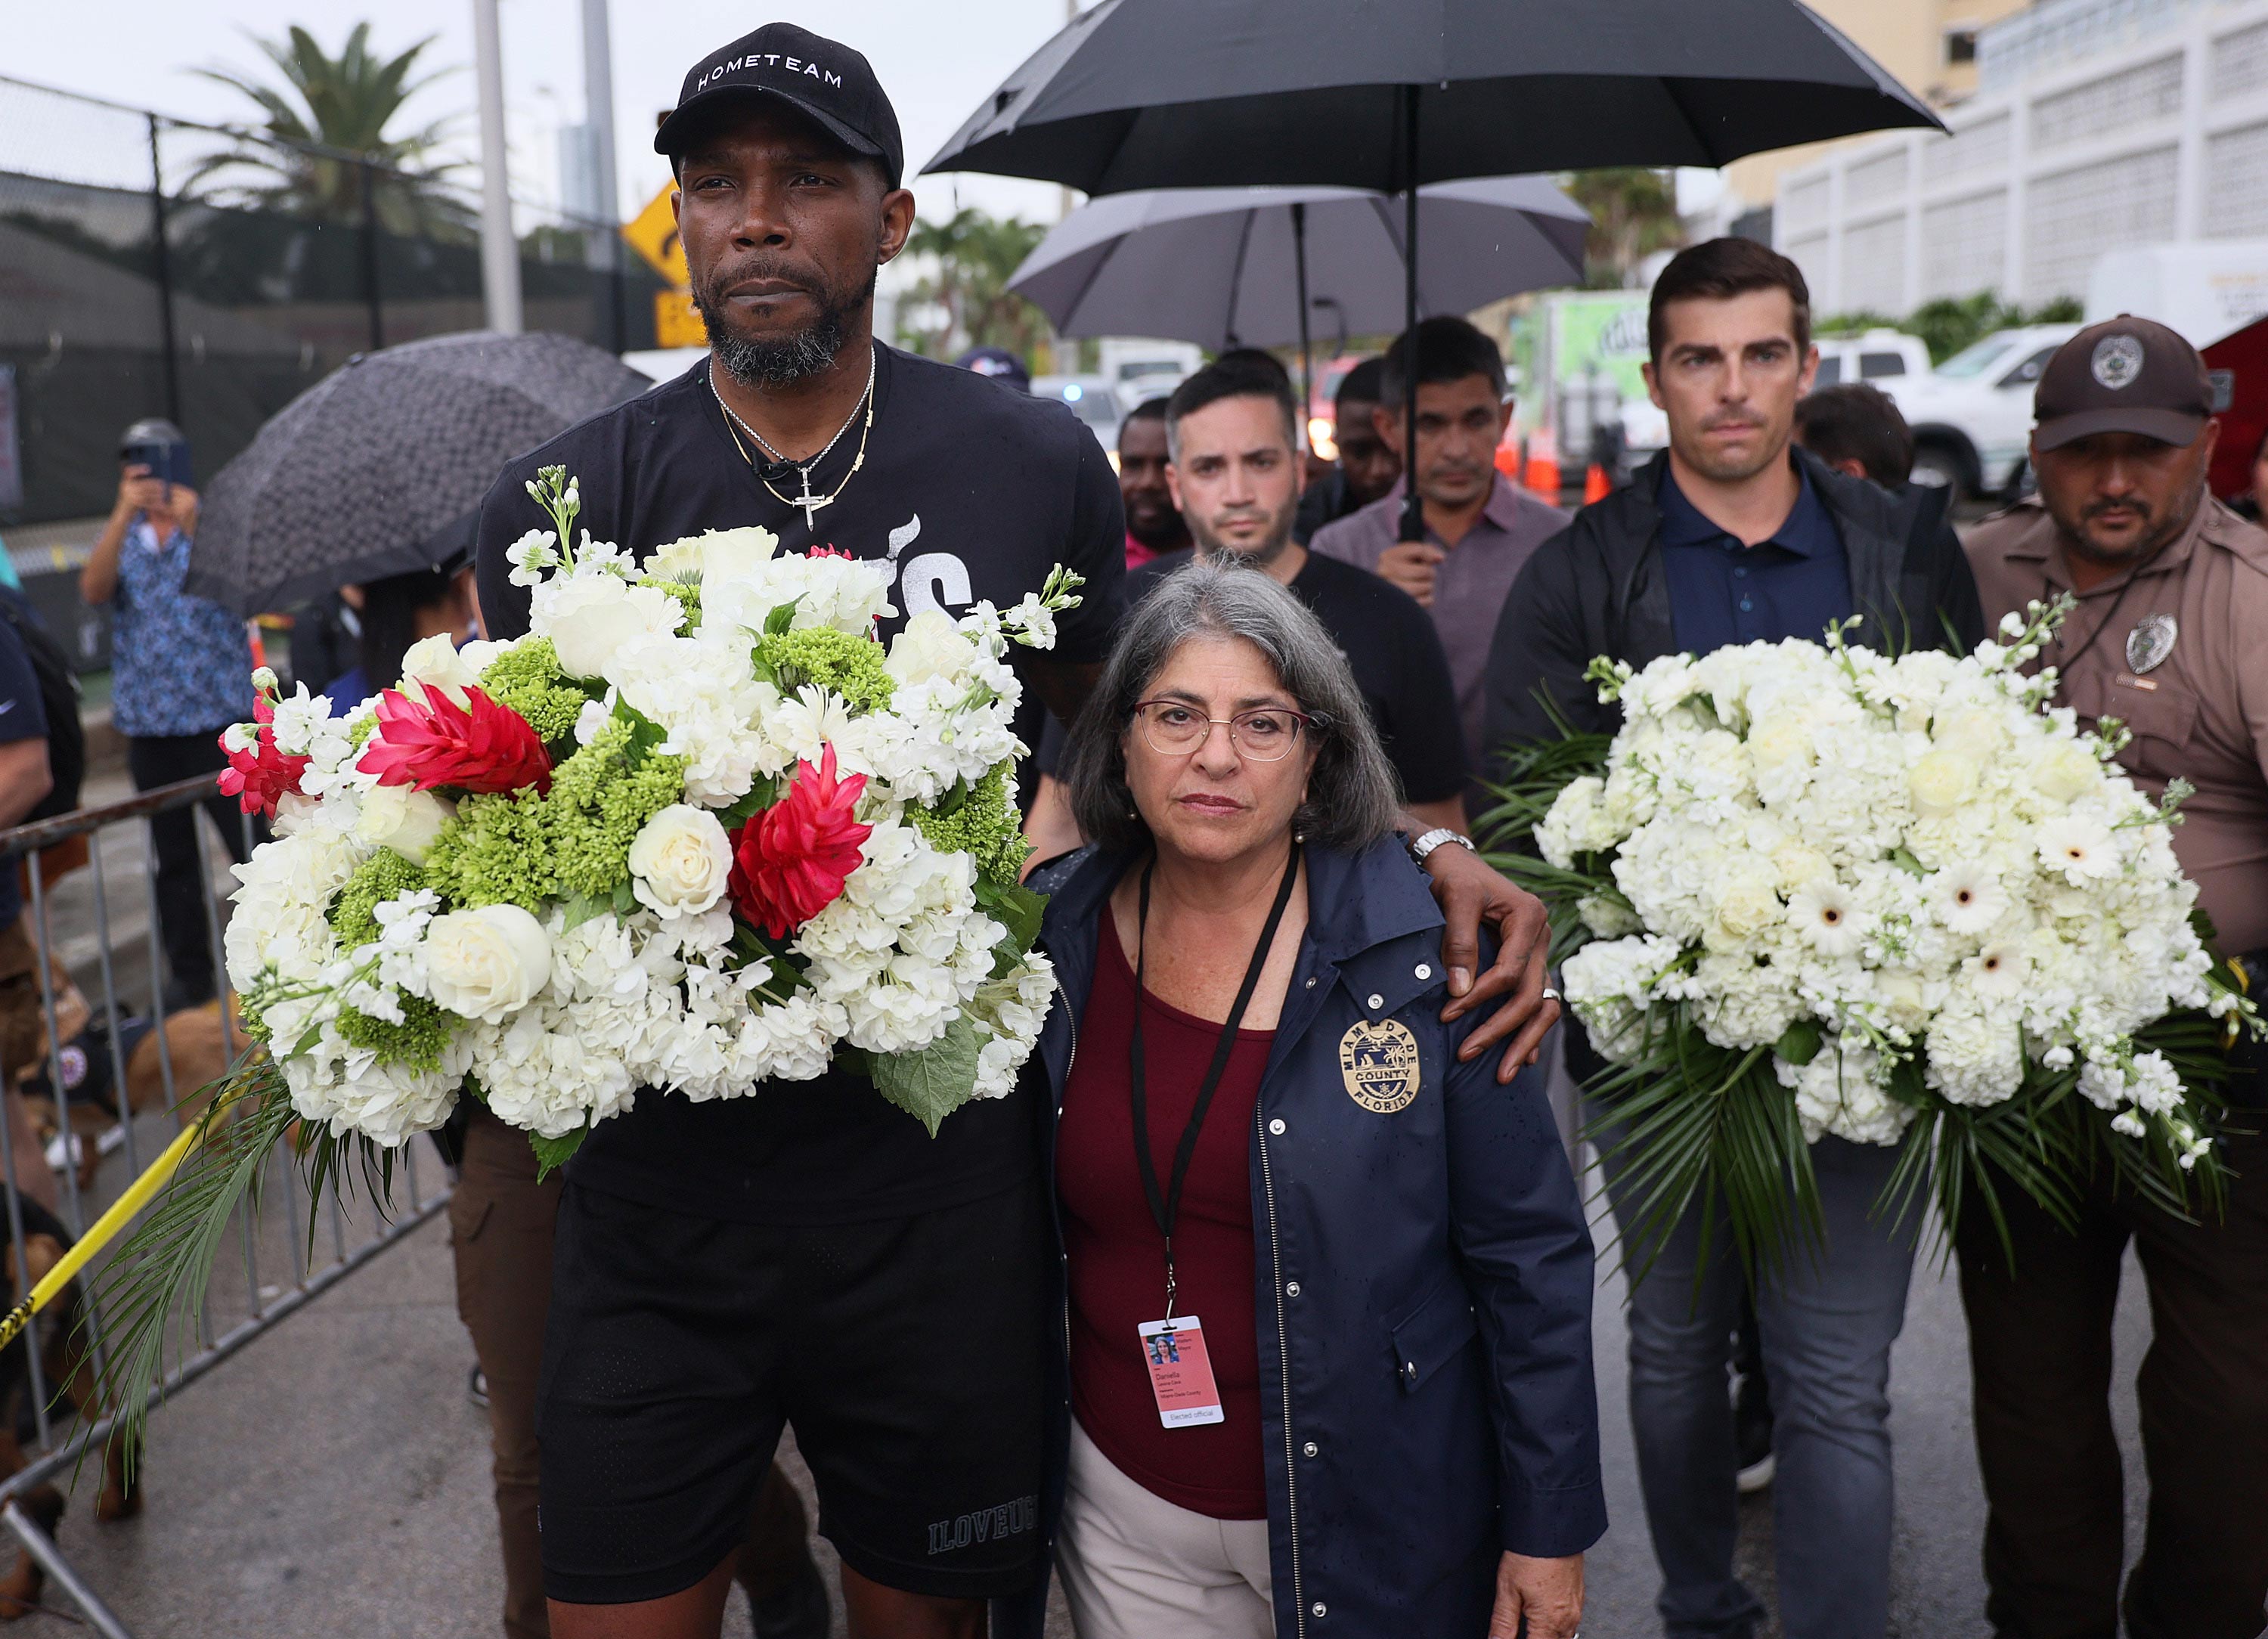 Udonis Haslem, from the Miami Heat basketball team, and Miami-Dade County Mayor Daniella Levine Cava arrive to pay their respects at a memorial to those missing from the partially collapsed Champlain Towers South condo building on June 30 Surfside, Florida. 